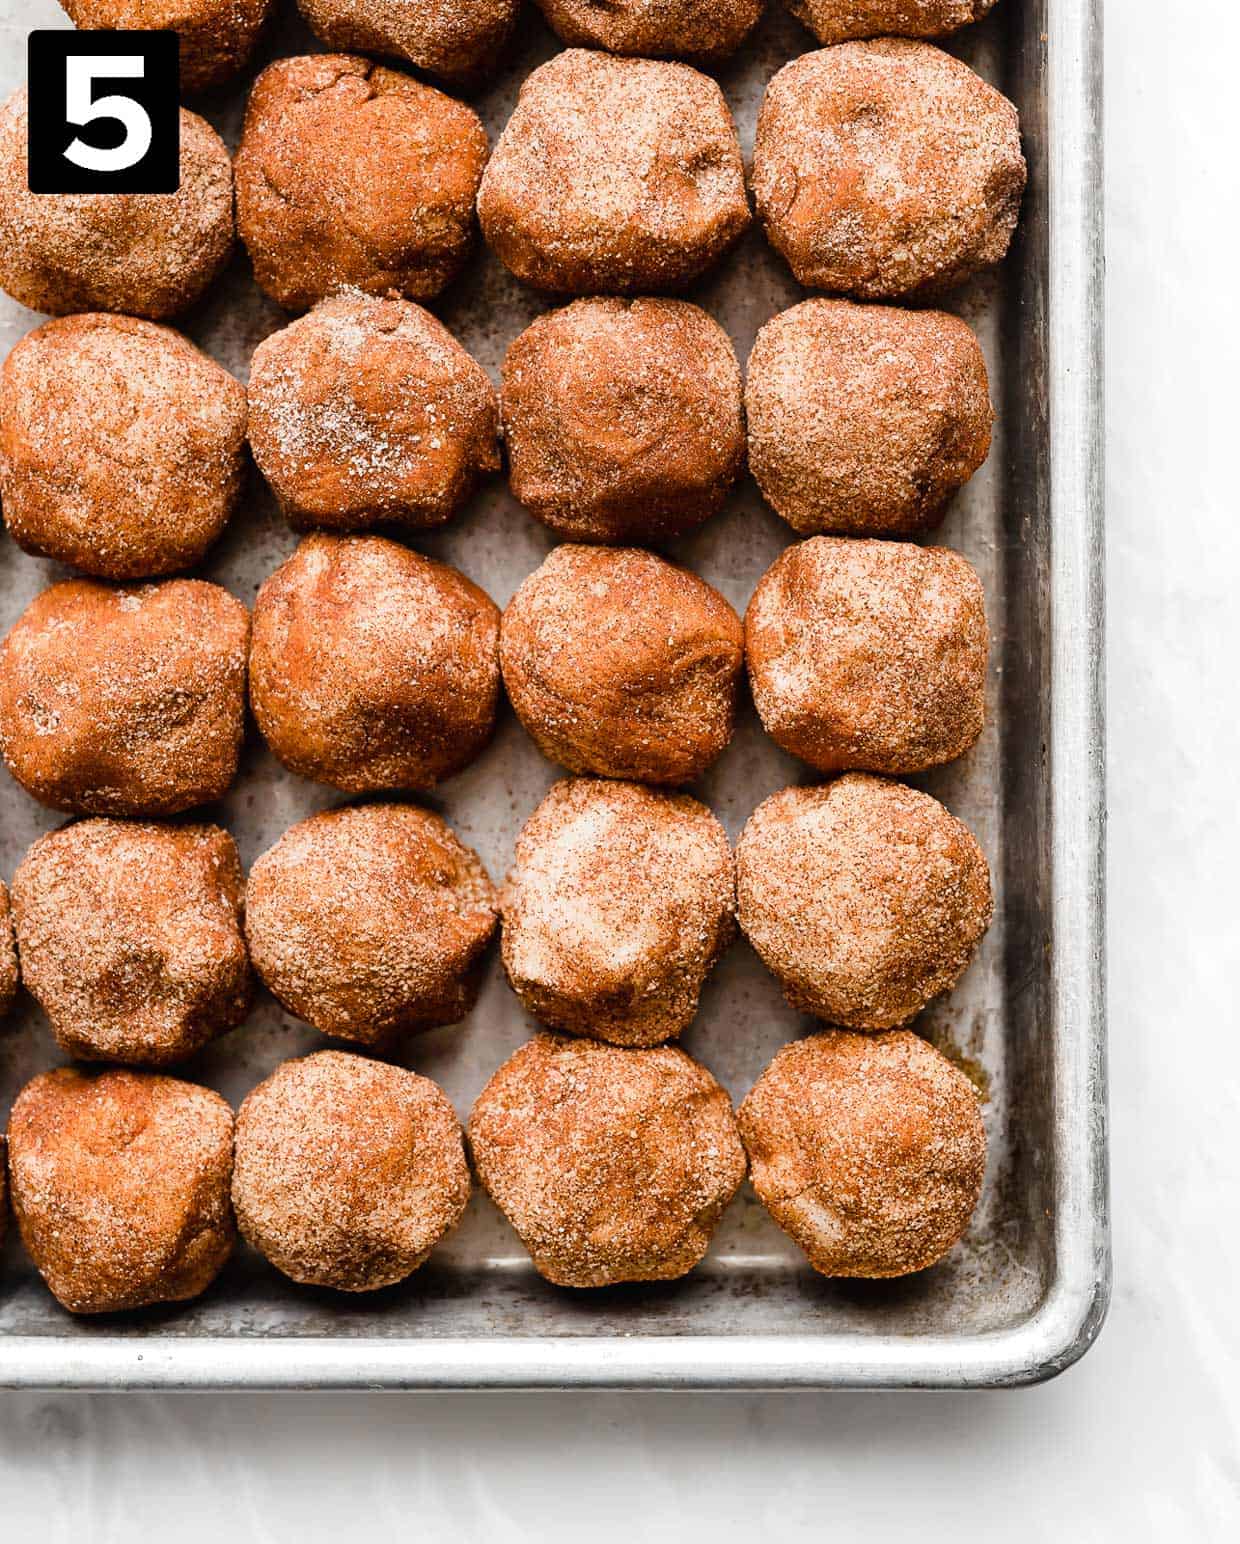 Cinnamon sugar coated snickerdoodle dough balls side by side on a baking sheet.